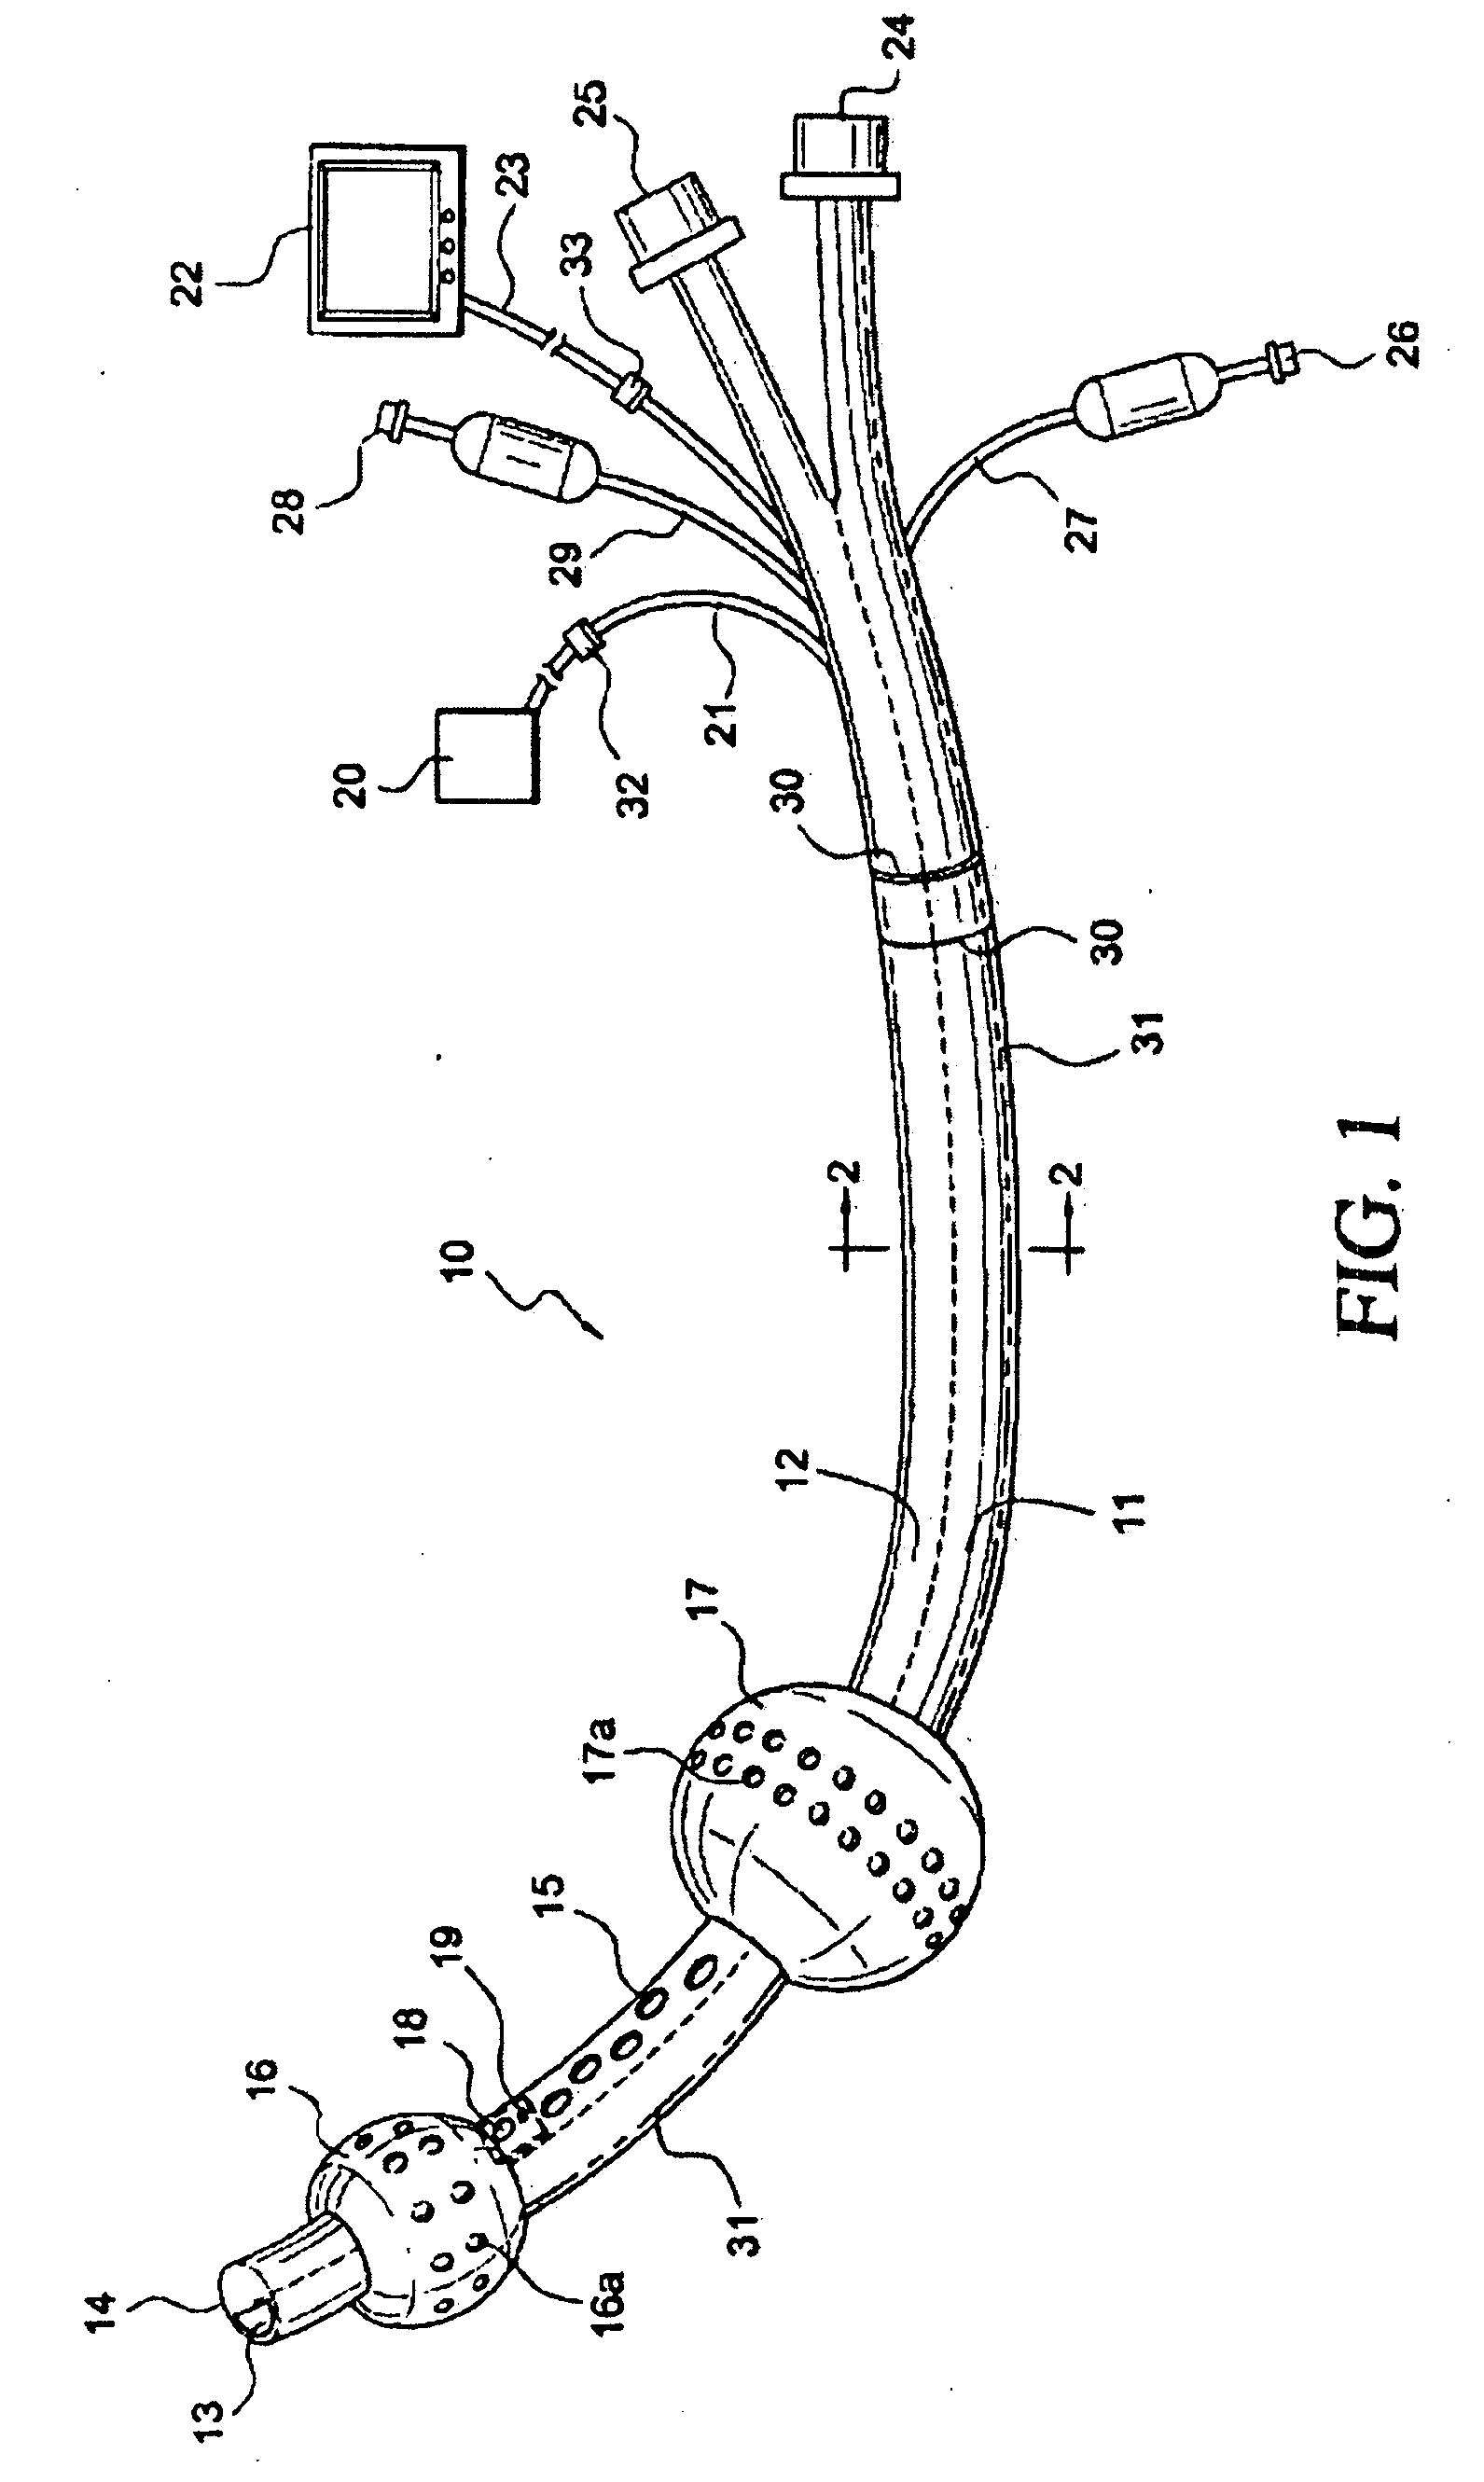 Visualization laryngeal airway apparatus and methods of use